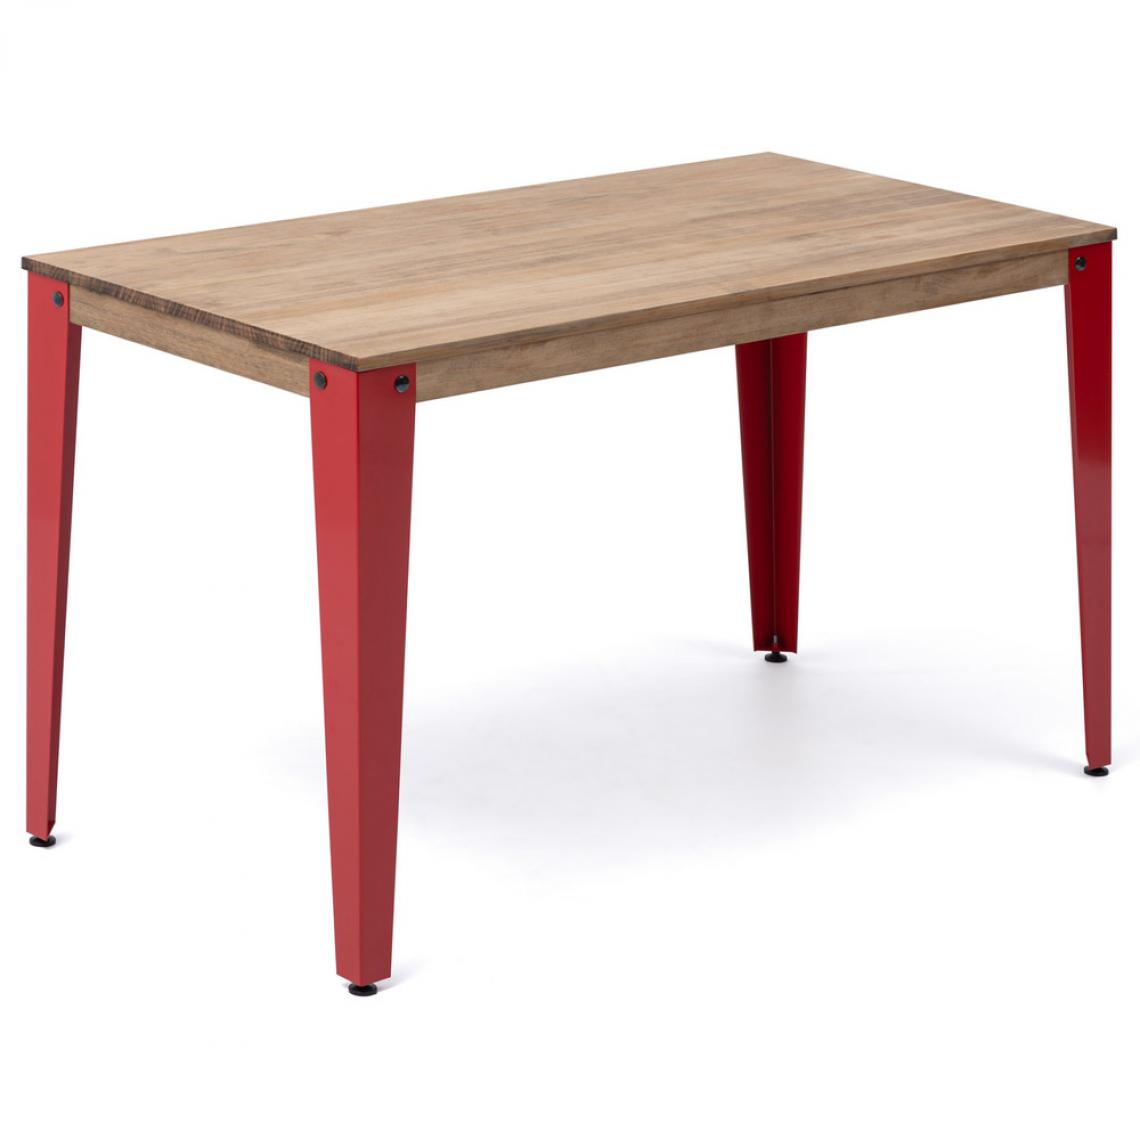 BOX FURNITURE - Table Salle a Manger Lunds 140x80x75cm Rouge-Vieilli Box Furniture - Tables à manger